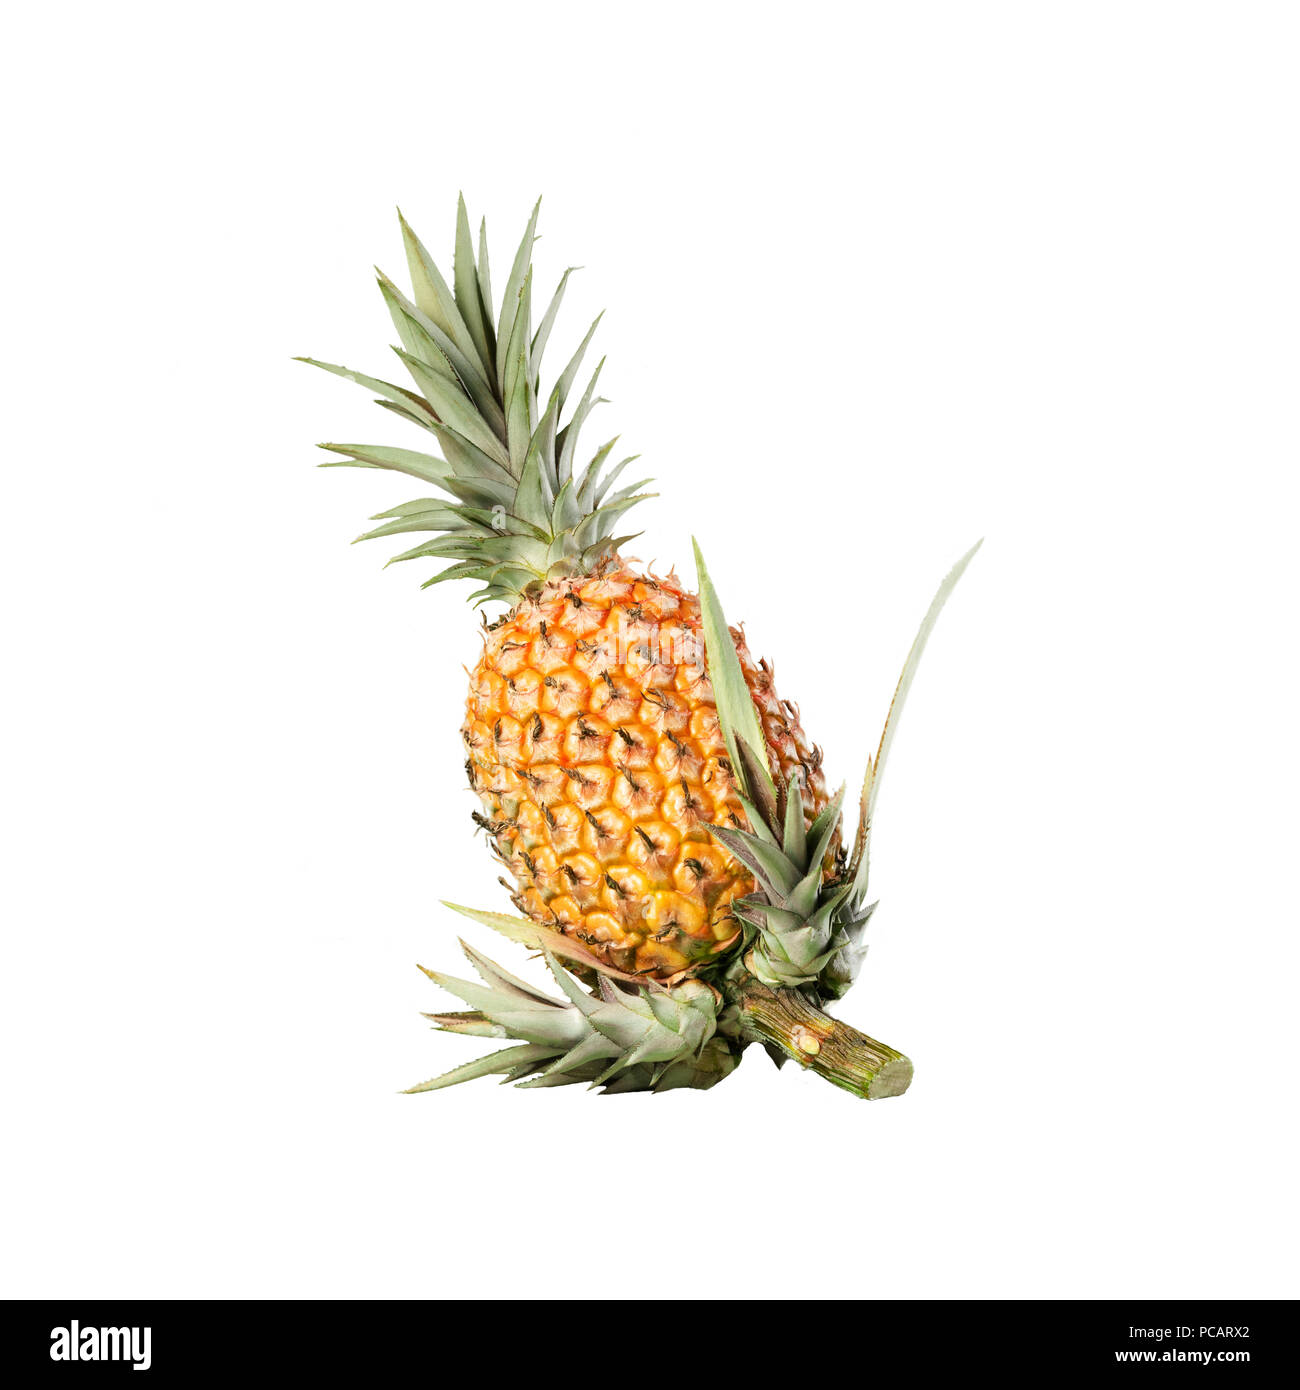 Pineapple whole organic white background with new shoots on stem, clipping cut out Stock Photo